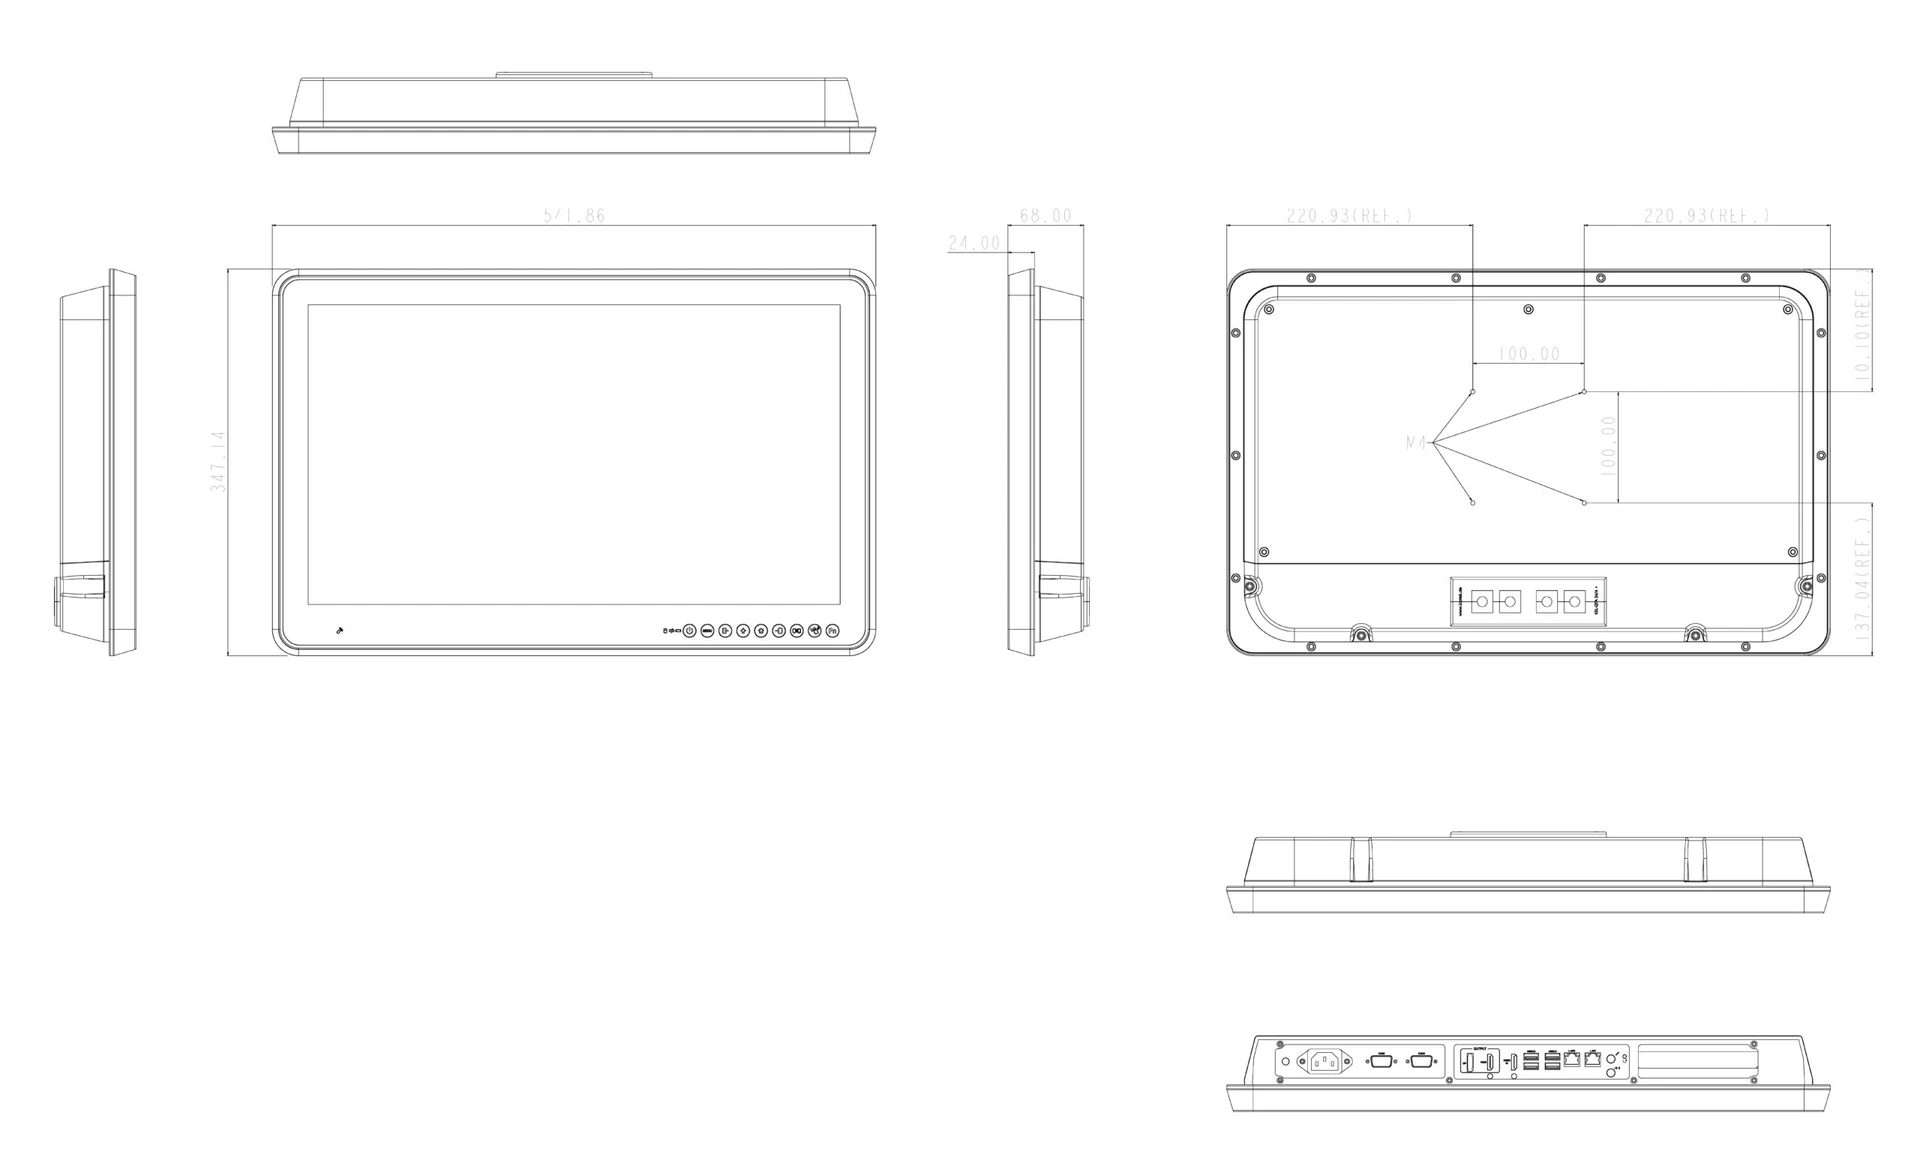 tm-7110-22 Technical Drawing